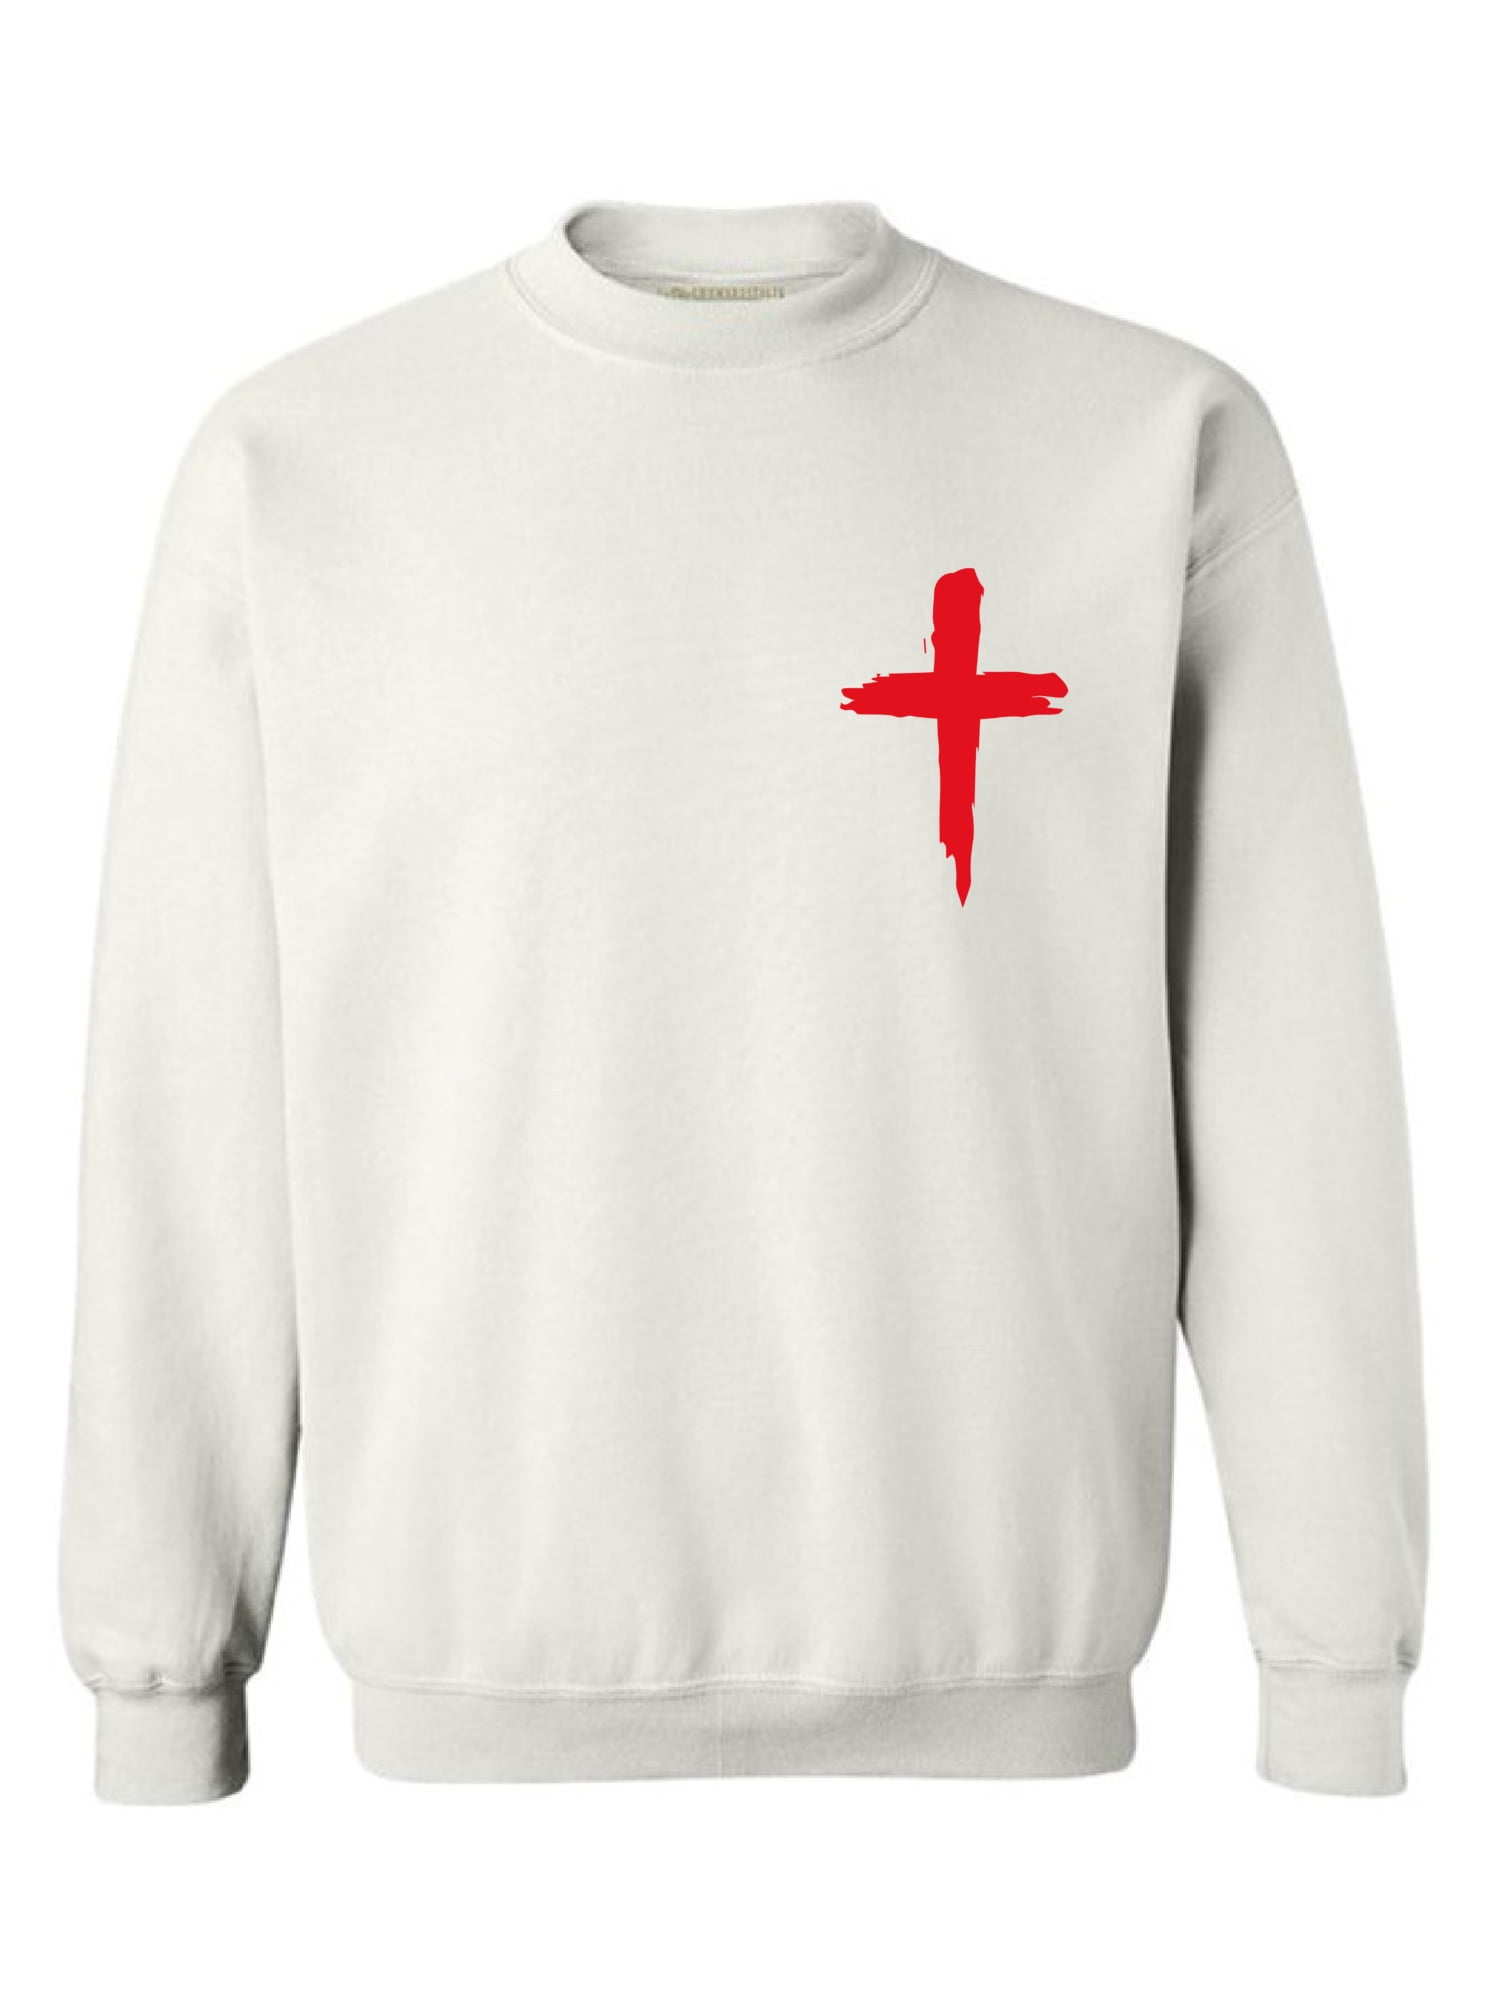 Awkward Styles Red Cross Unisex Crewnecks Christian Crewneck for Her Cross  Clothes Collection Jesus Cross Crewneck for Women Jesus Sweater for Men  Christian Gifts Cross Outfit for Men and Women 